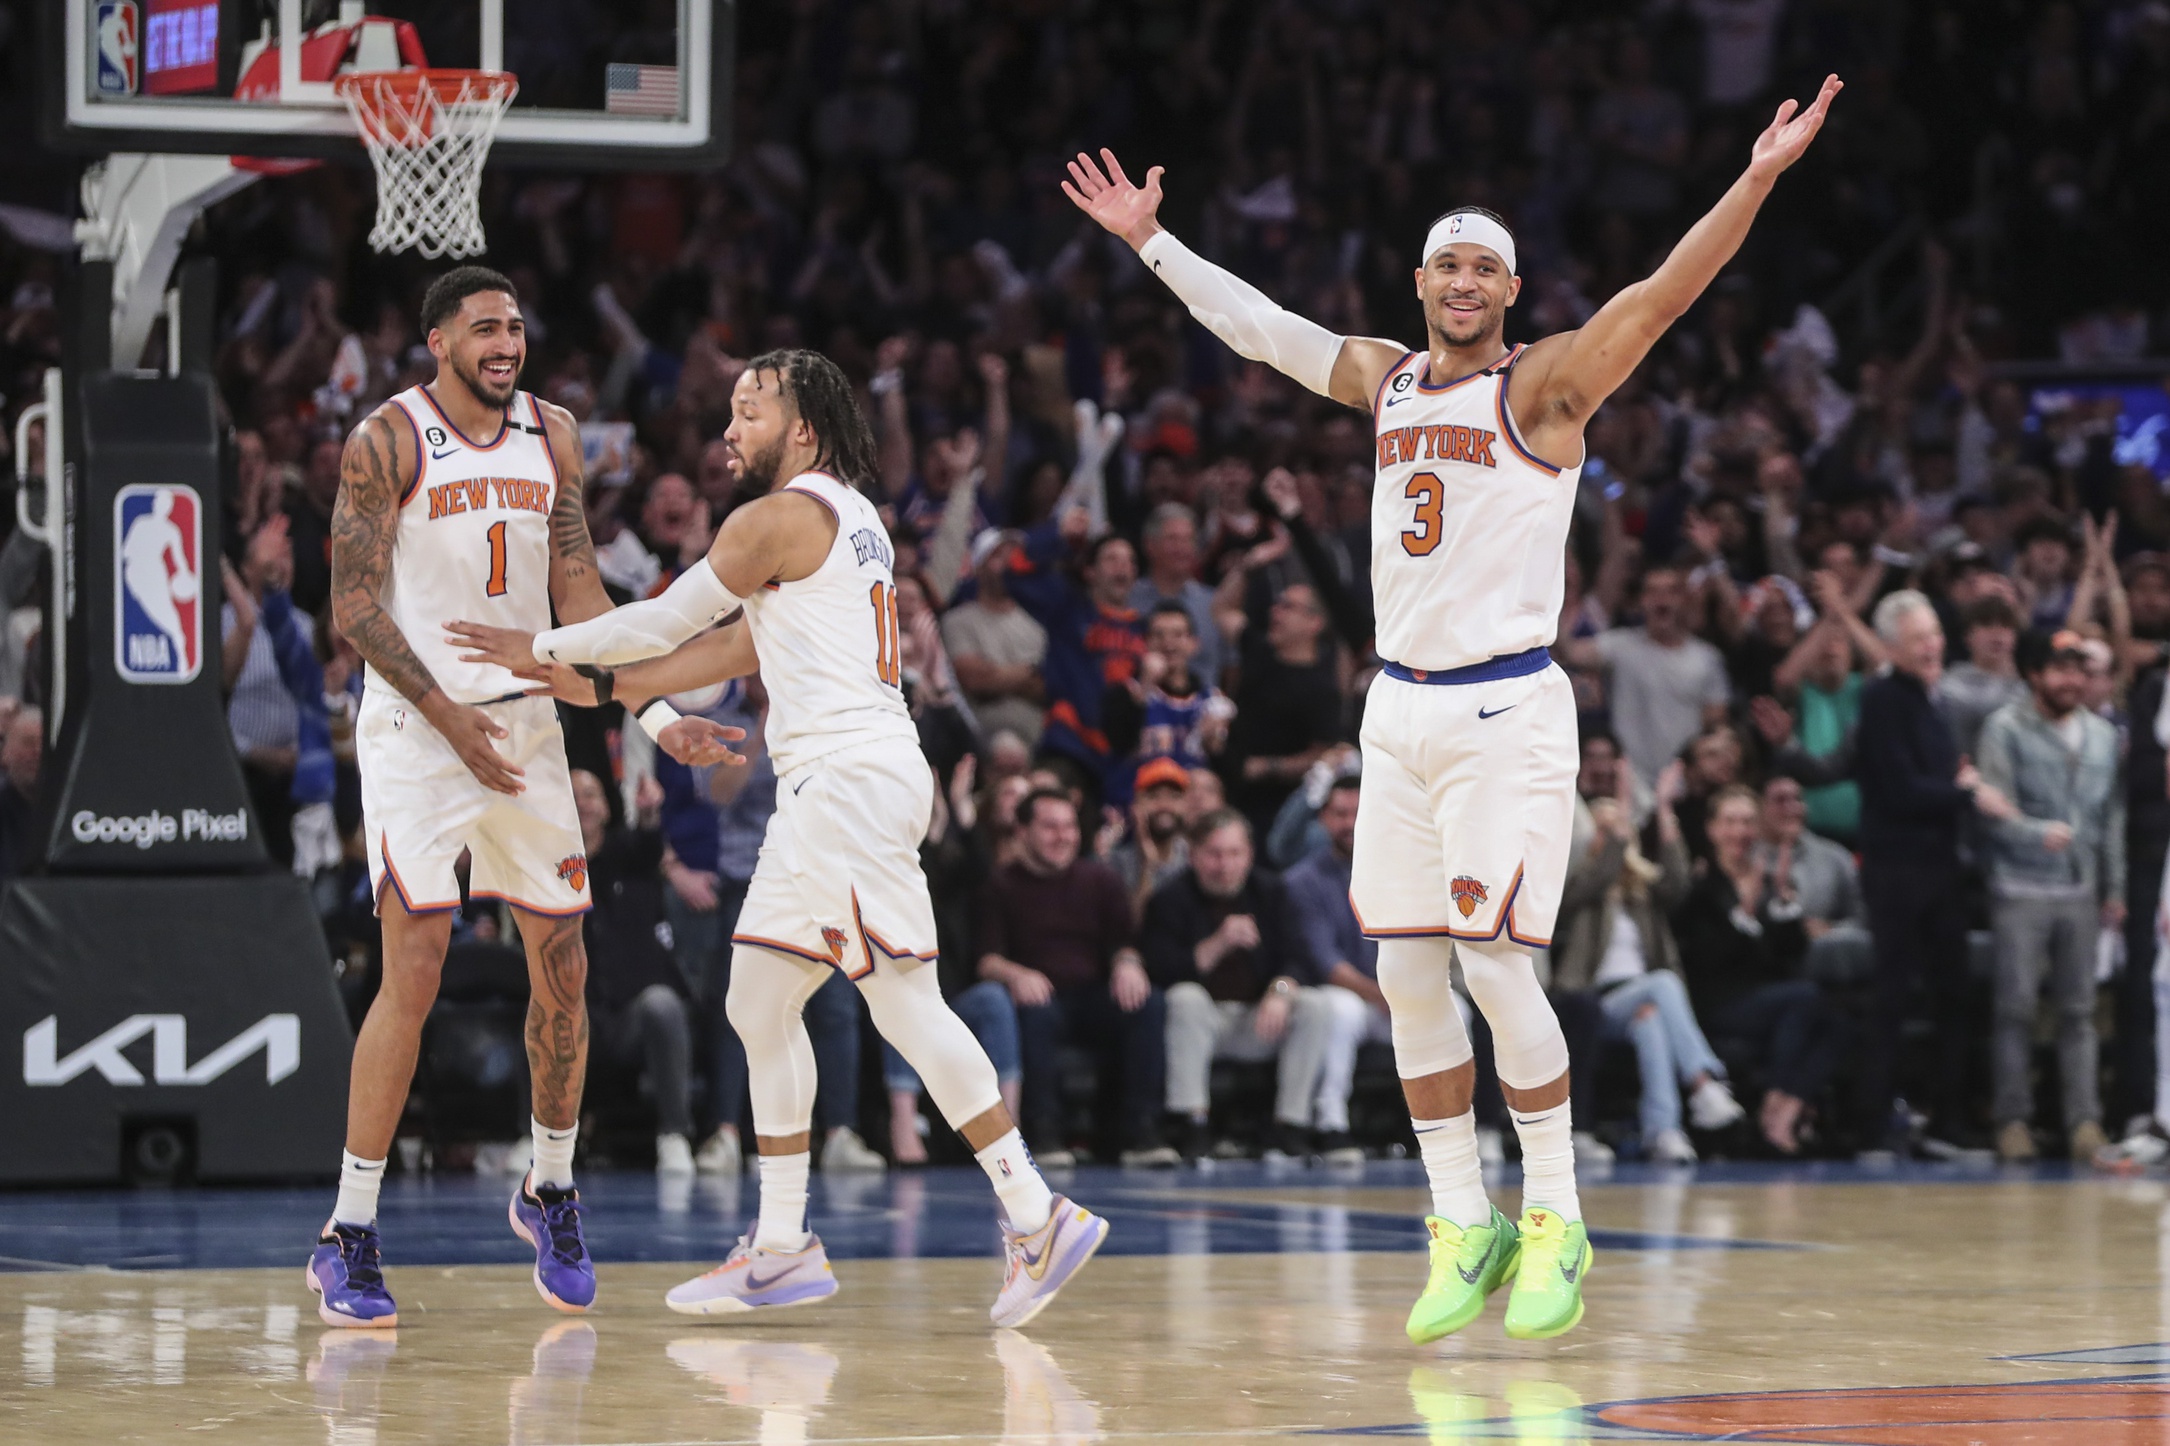 Impressive Cavs season comes to an end with series loss against Knicks